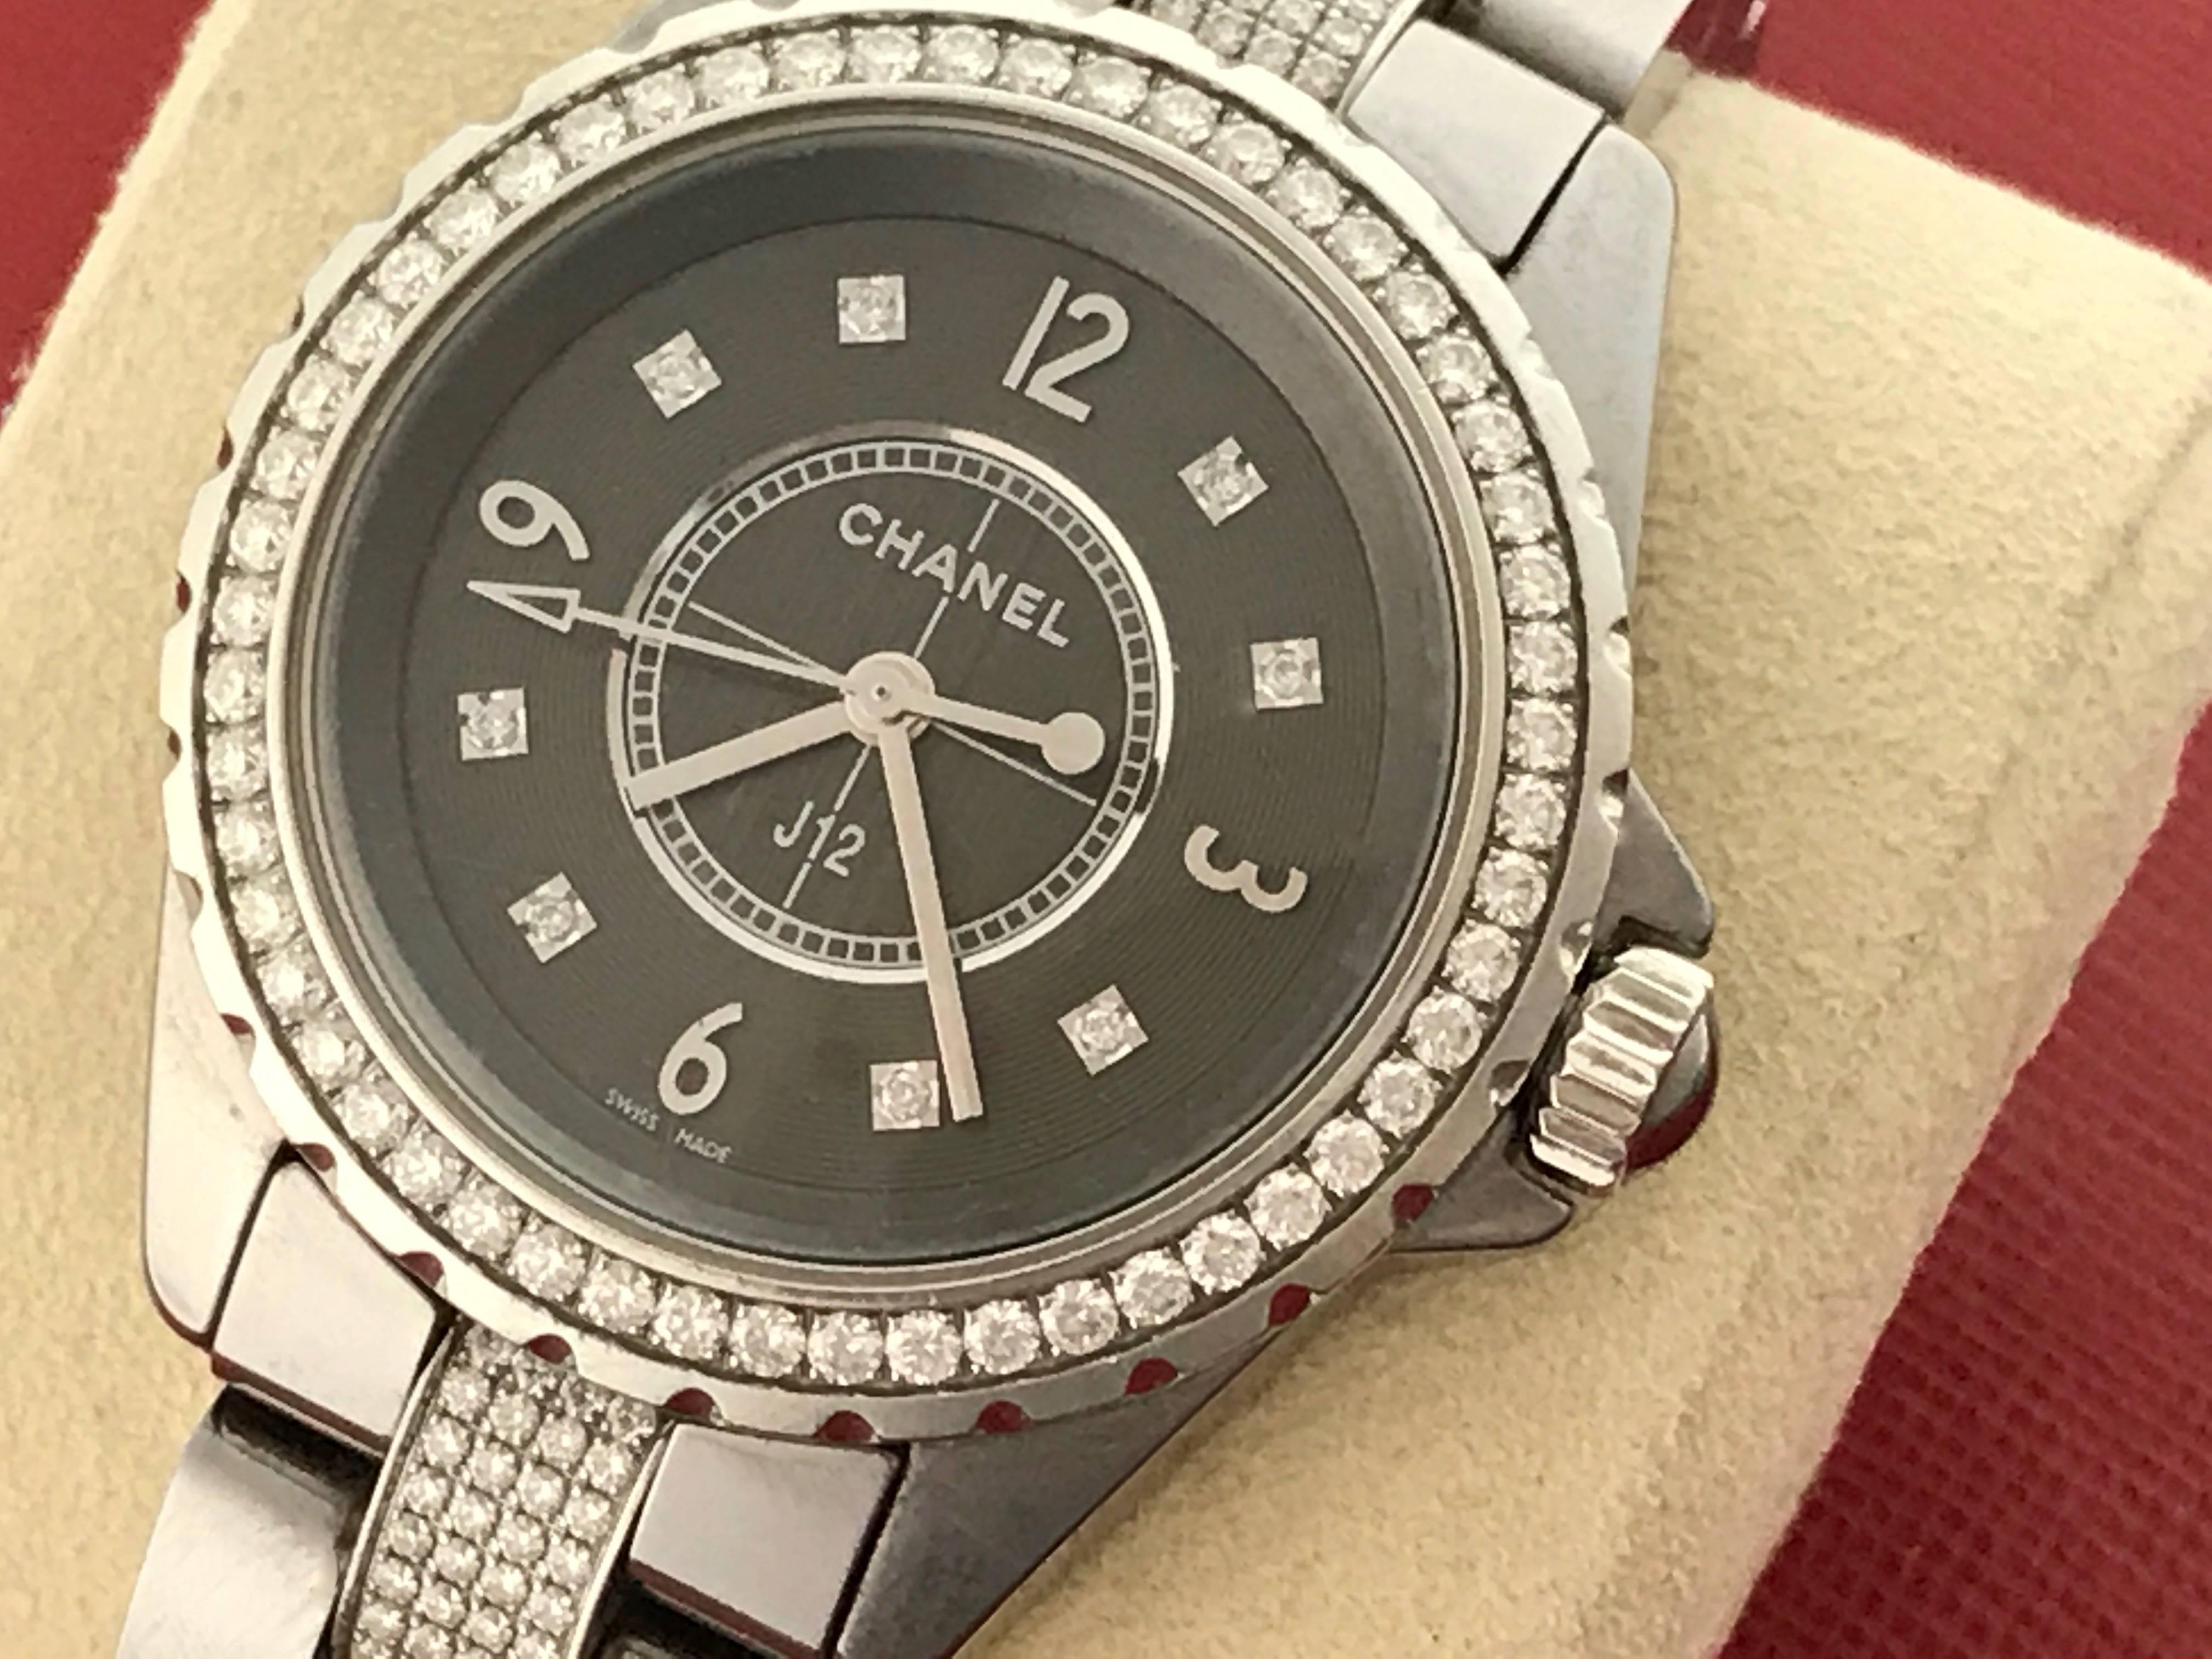 As New Midsize Chanel J12 Model H3106 Chromatic Titanium Ceramic wrist watch. Certified pre-owned and ready to ship.  Quartz movement.  Titanium scratch-proof ceramic round case with Chanel Diamond bezel, measures 33mm (not including the crown).